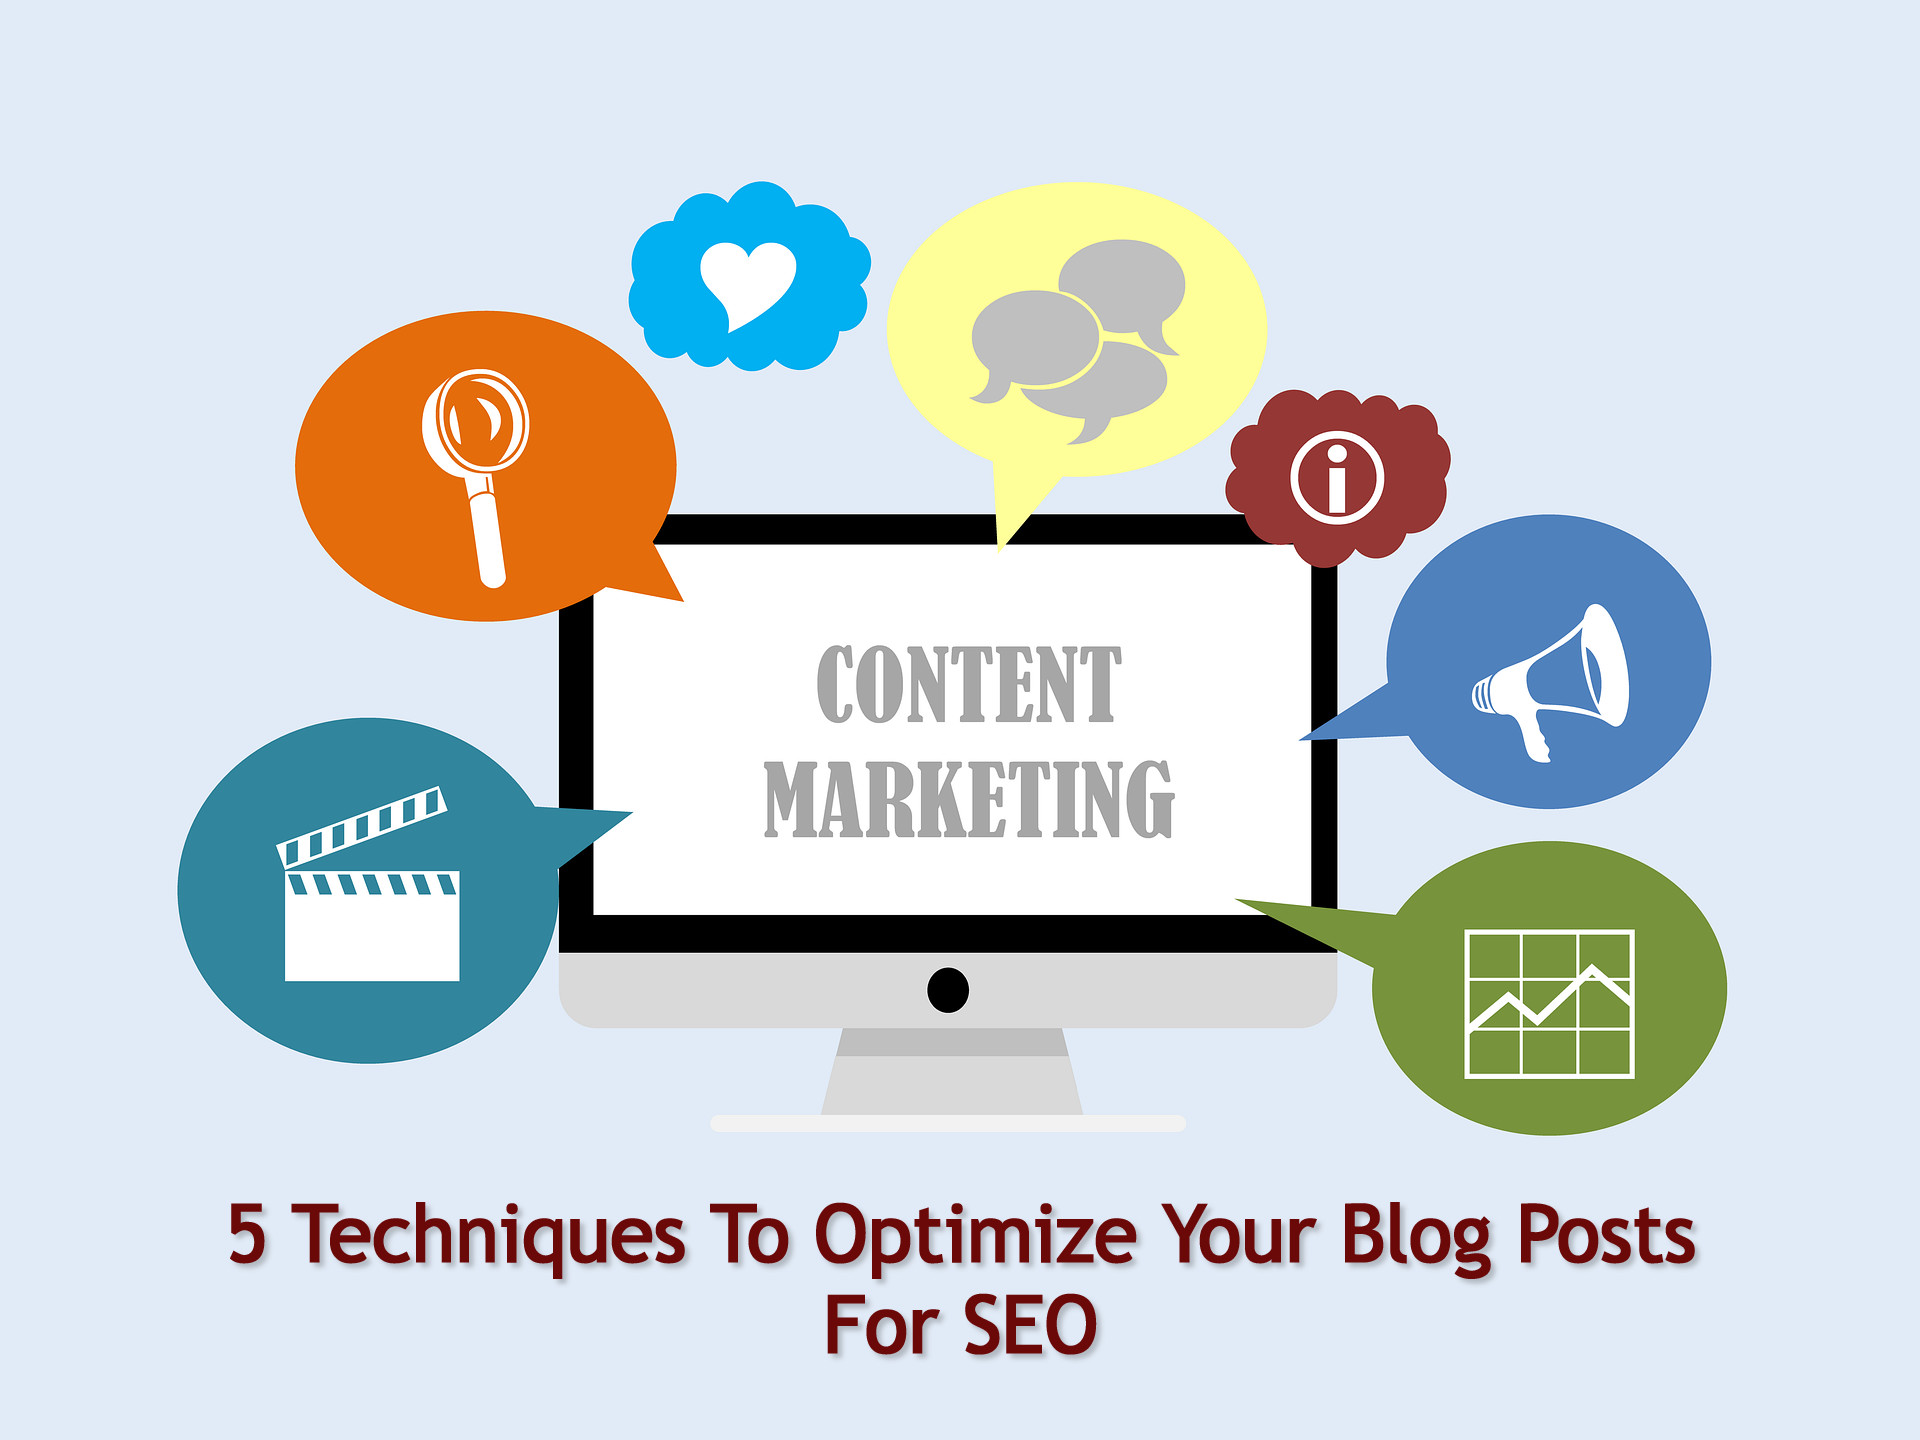 5 Techniques To Optimize Your Blog Posts for SEO